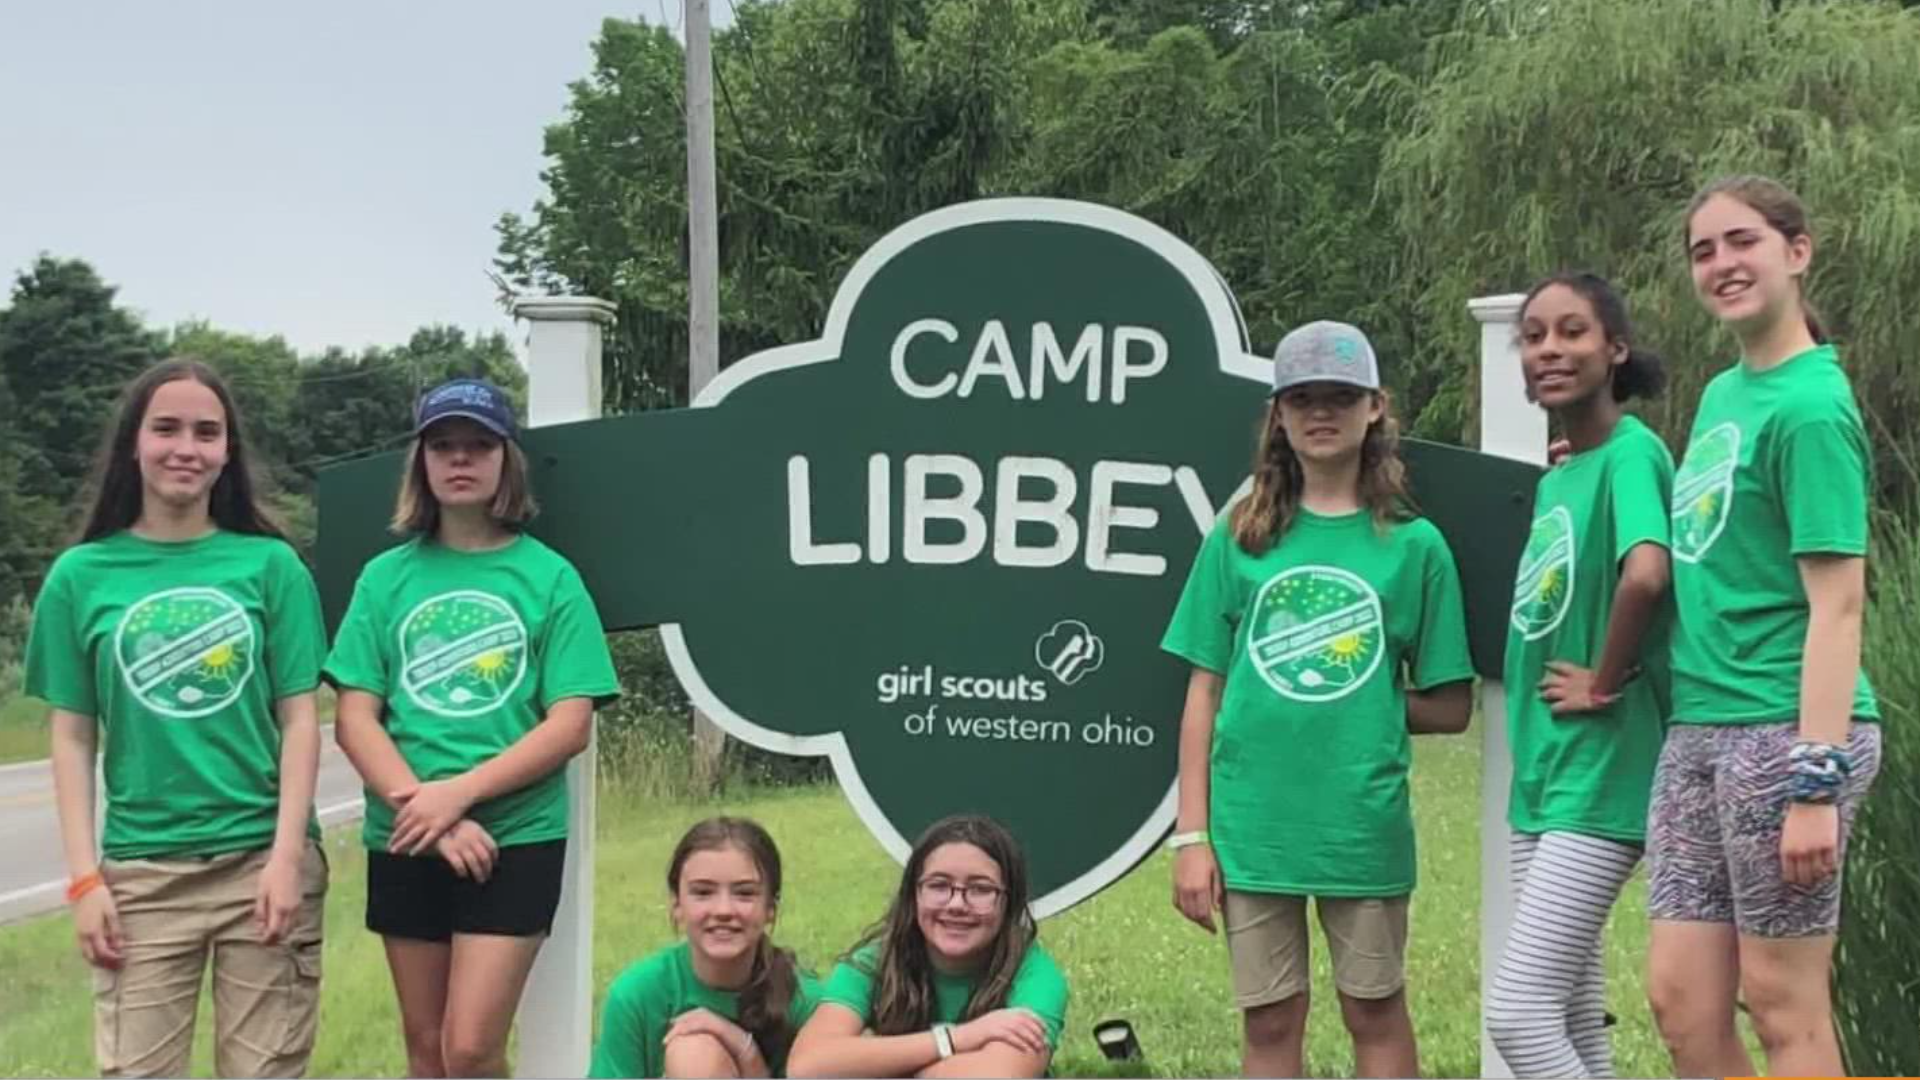 Diane Phillips gives us a look at all the S.T.E.M.  improvements at Camp Libbey as she encourages girl scouts to expand their science and technology horizons.